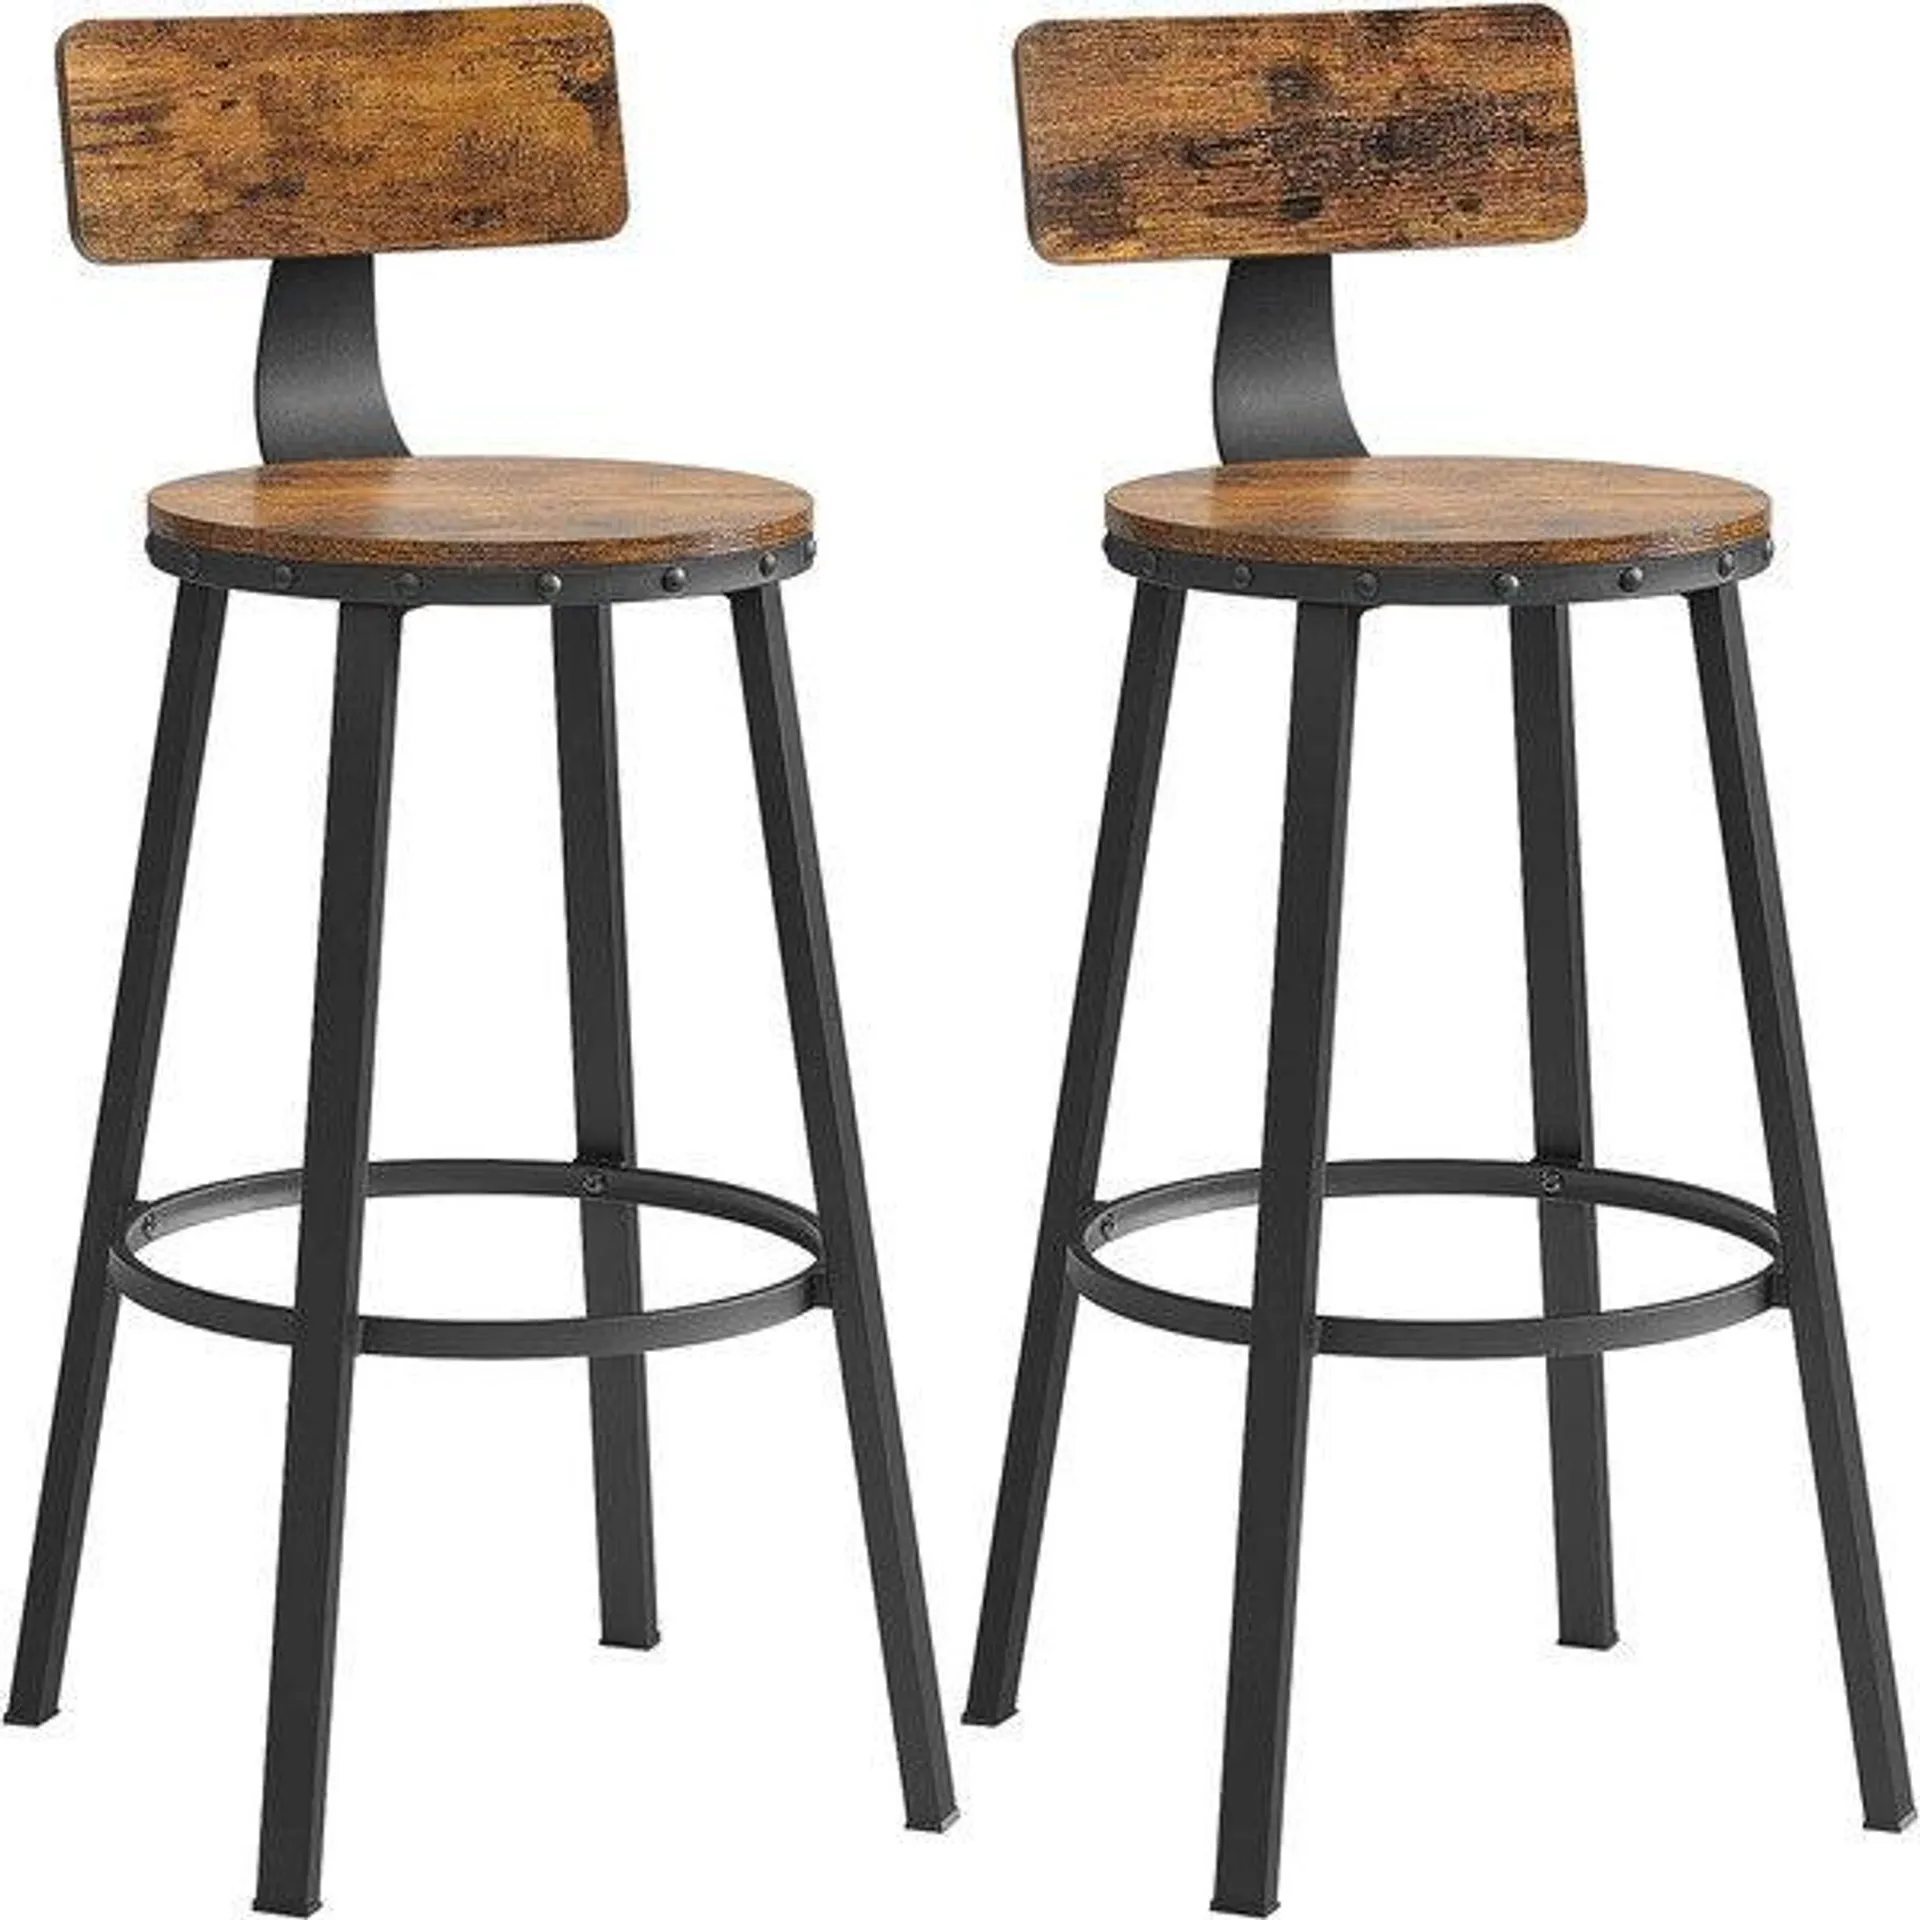 2 PIECE SET OF BAR STOOL CHAIRS